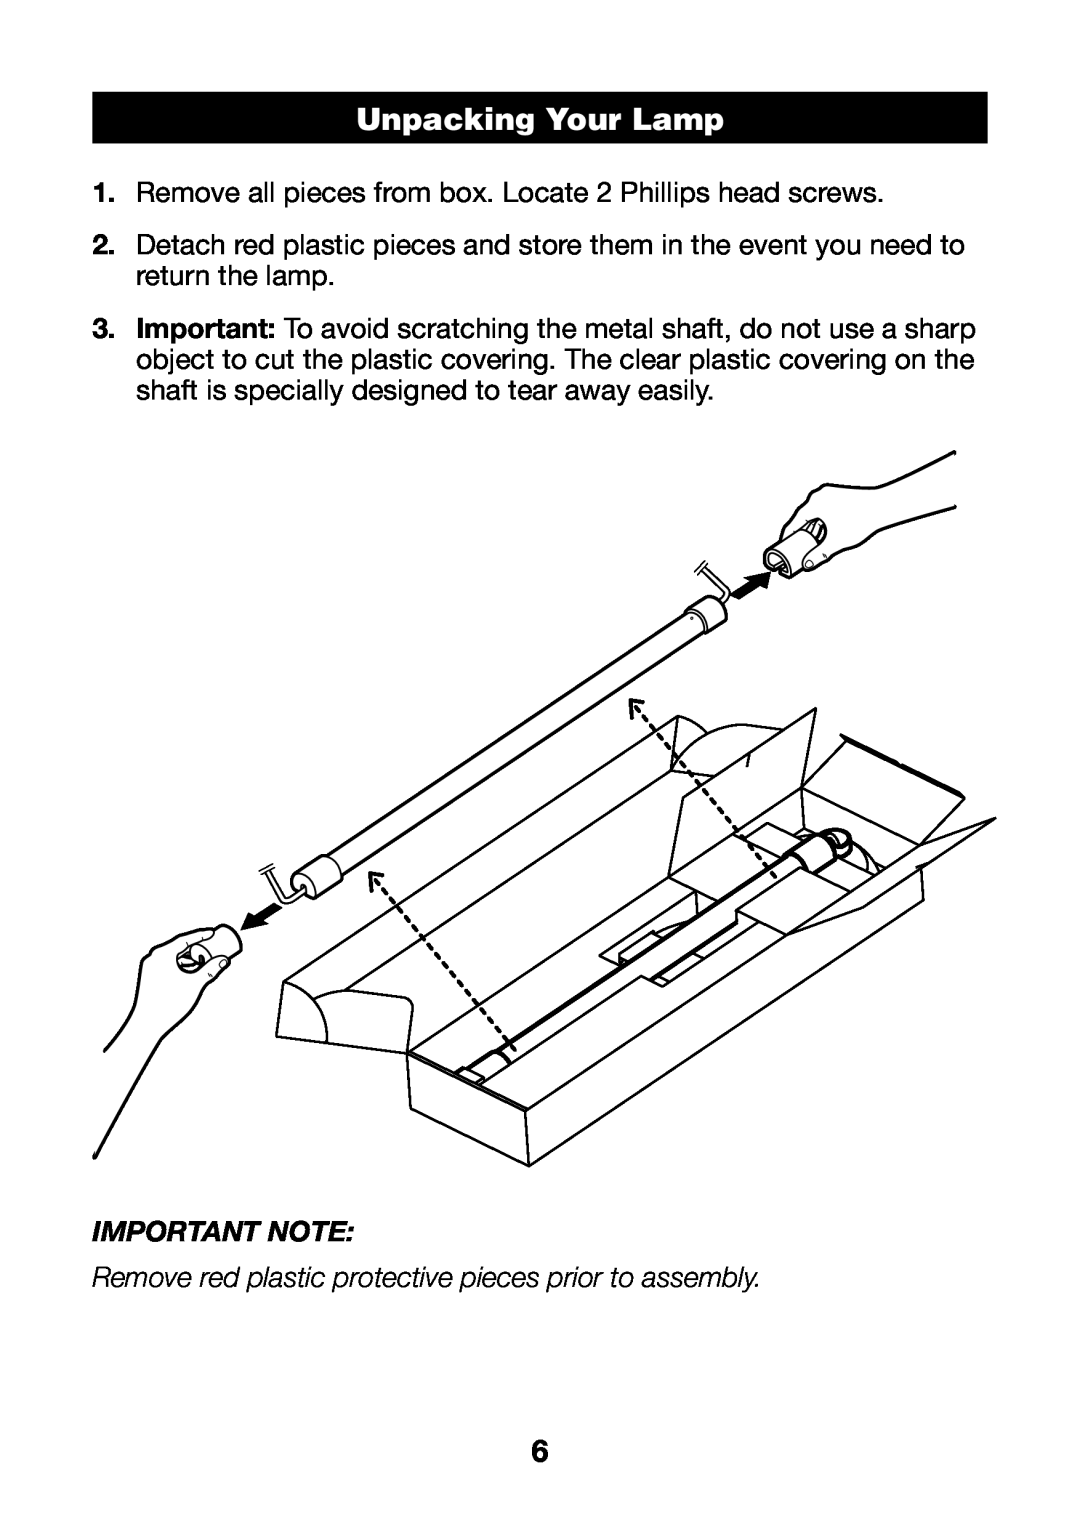 Verilux VF01 manual Unpacking Your Lamp, Important Note 